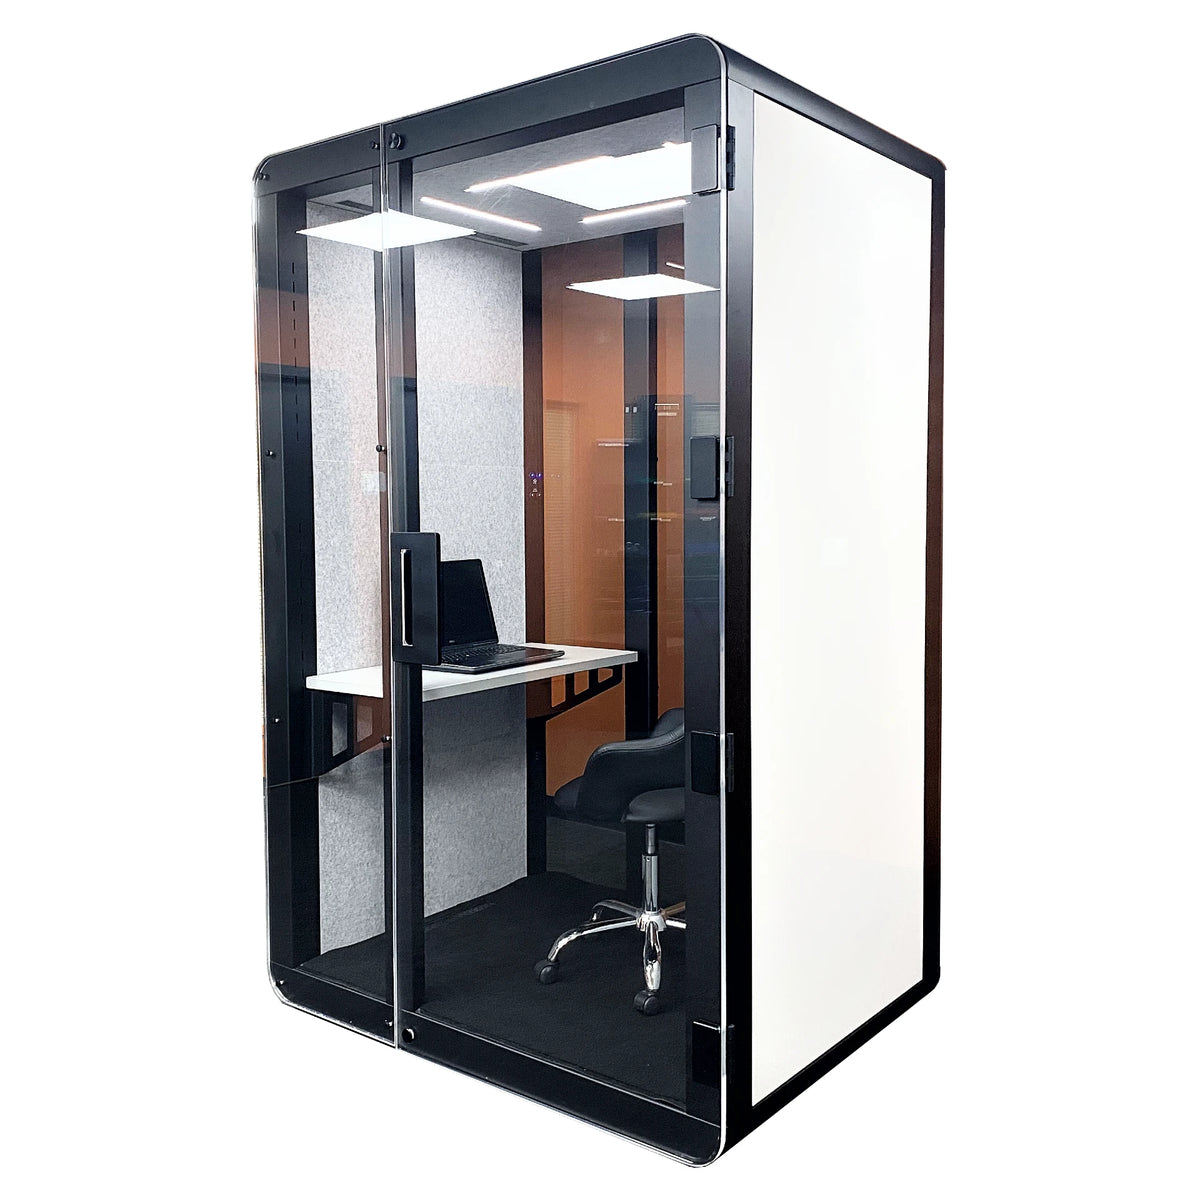 Soundproof Micro-office 'delta M' by Getawayer Canada Inc. Now available in the USA. Portable office pod. Privacy booth. Individual workstation.